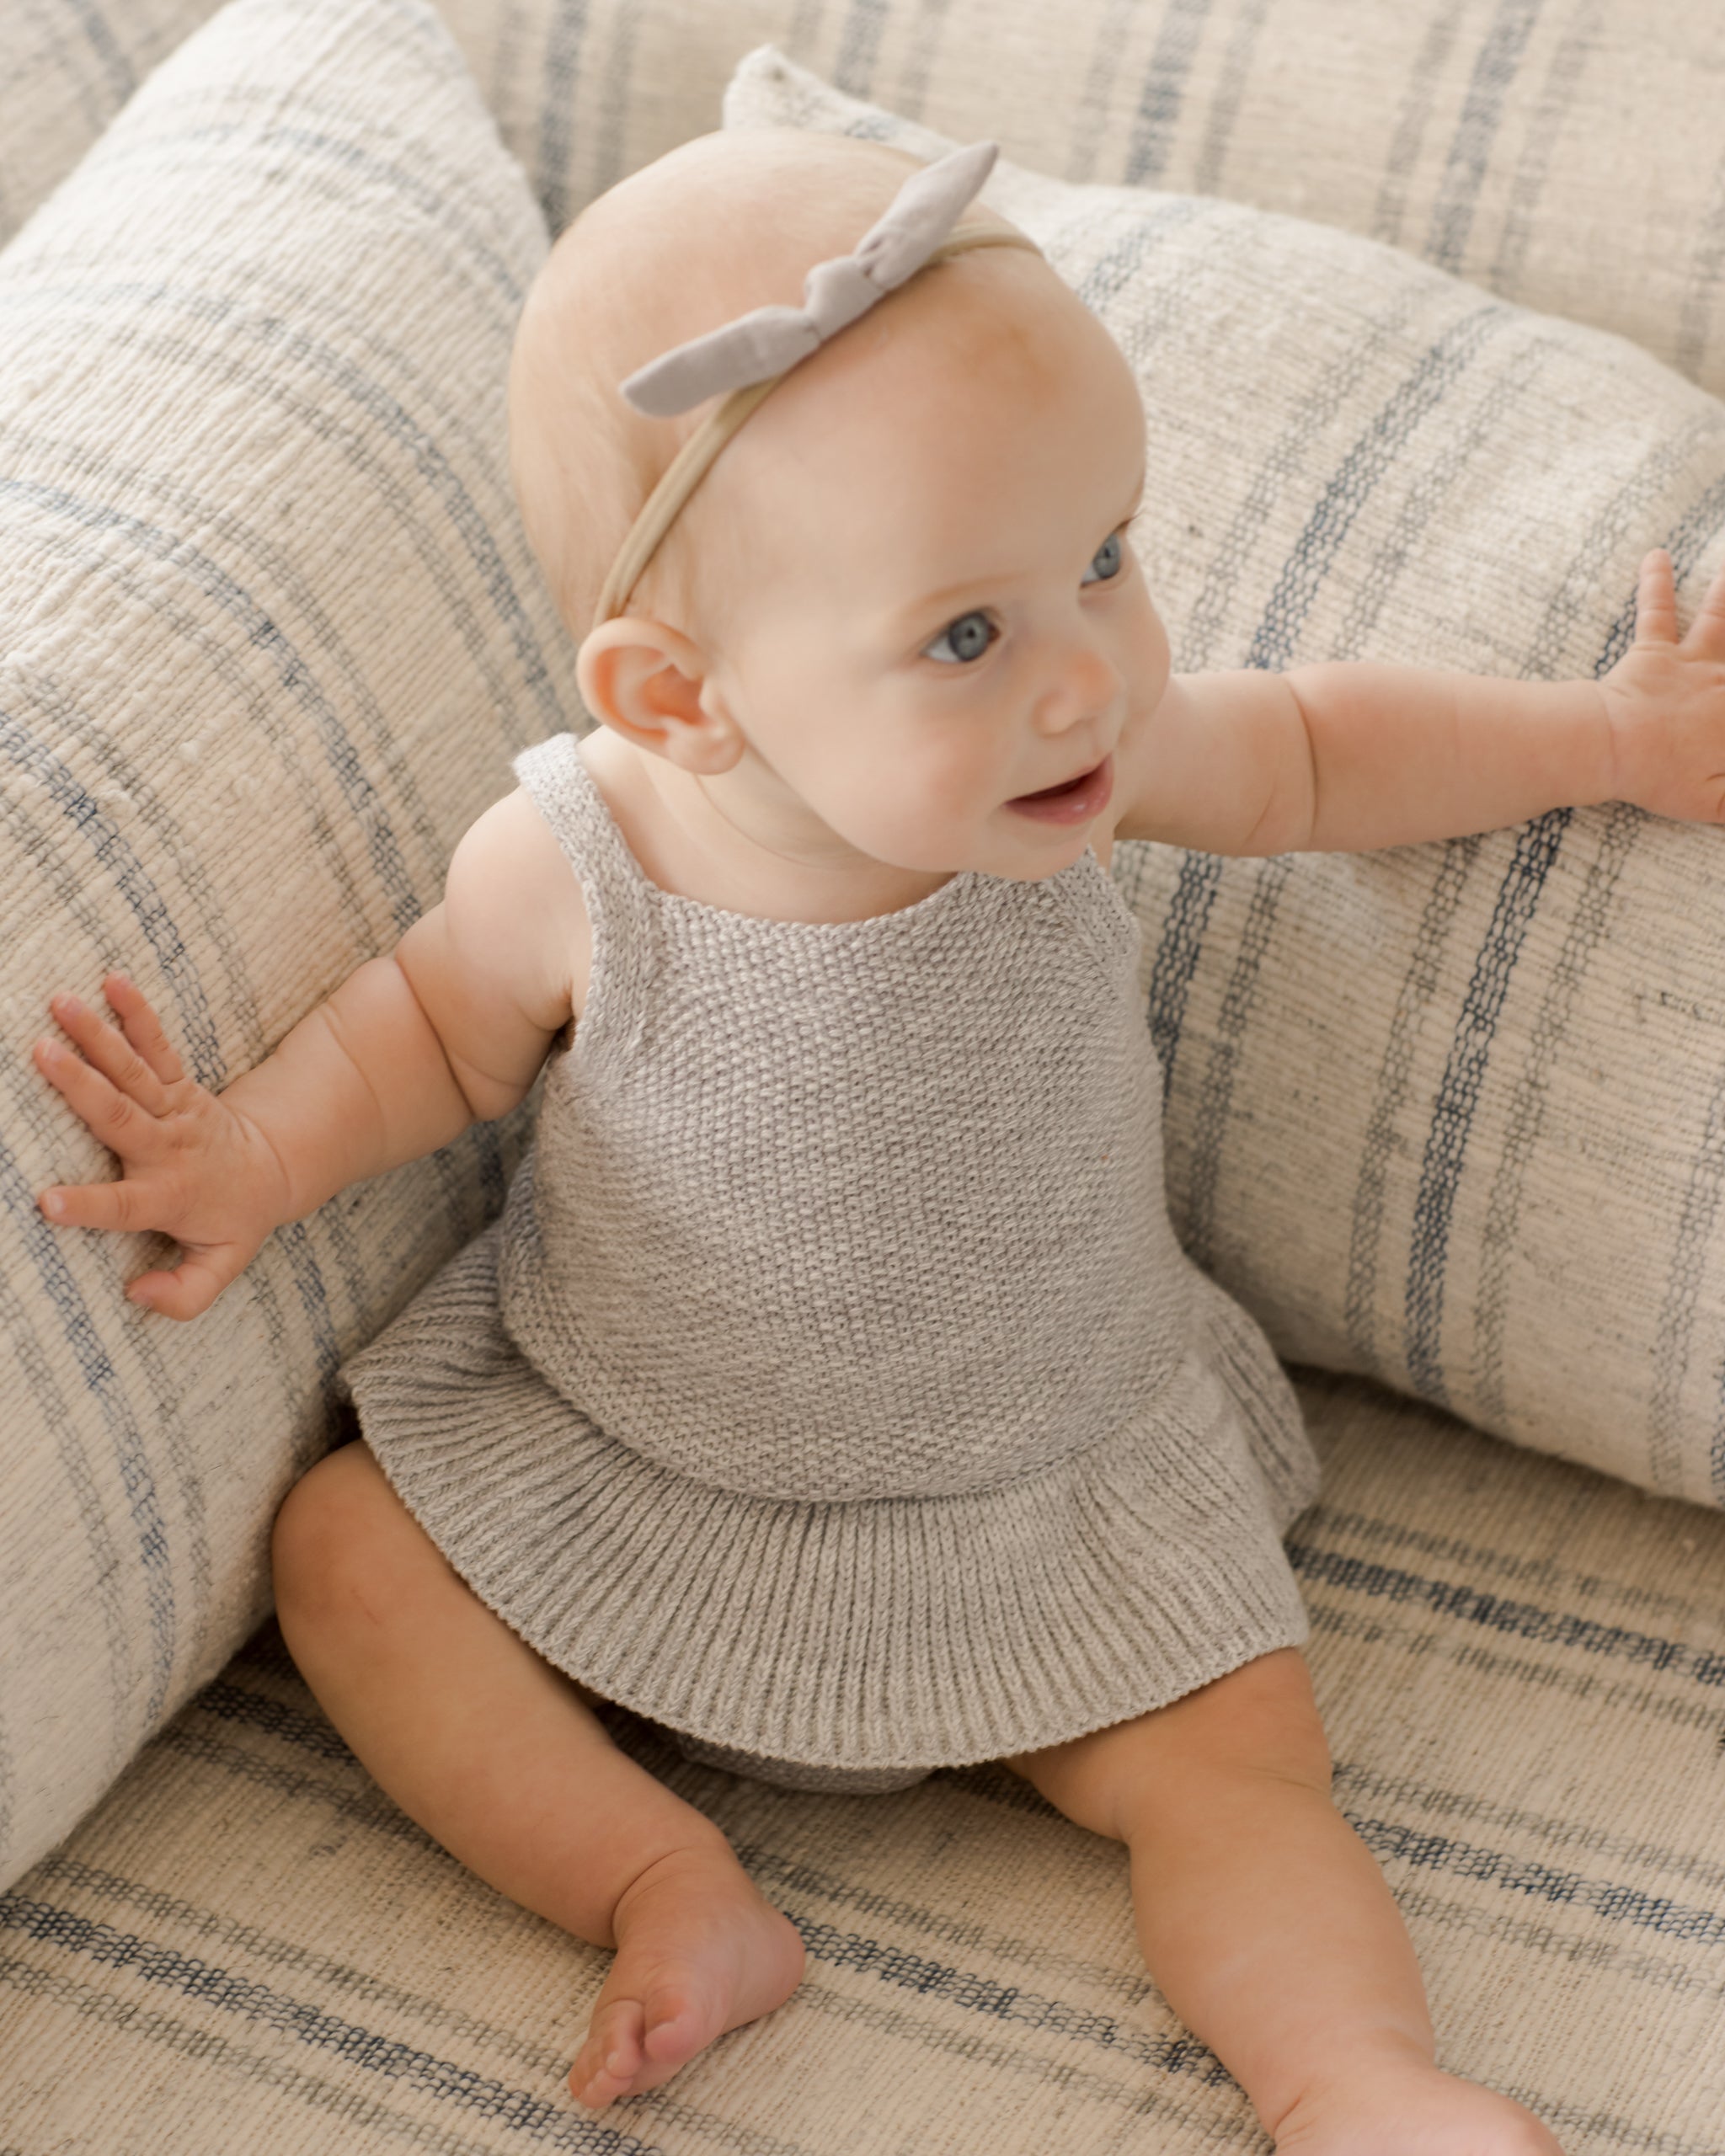 Knit Ruffle Romper || Heathered Periwinkle - Rylee + Cru | Kids Clothes | Trendy Baby Clothes | Modern Infant Outfits |